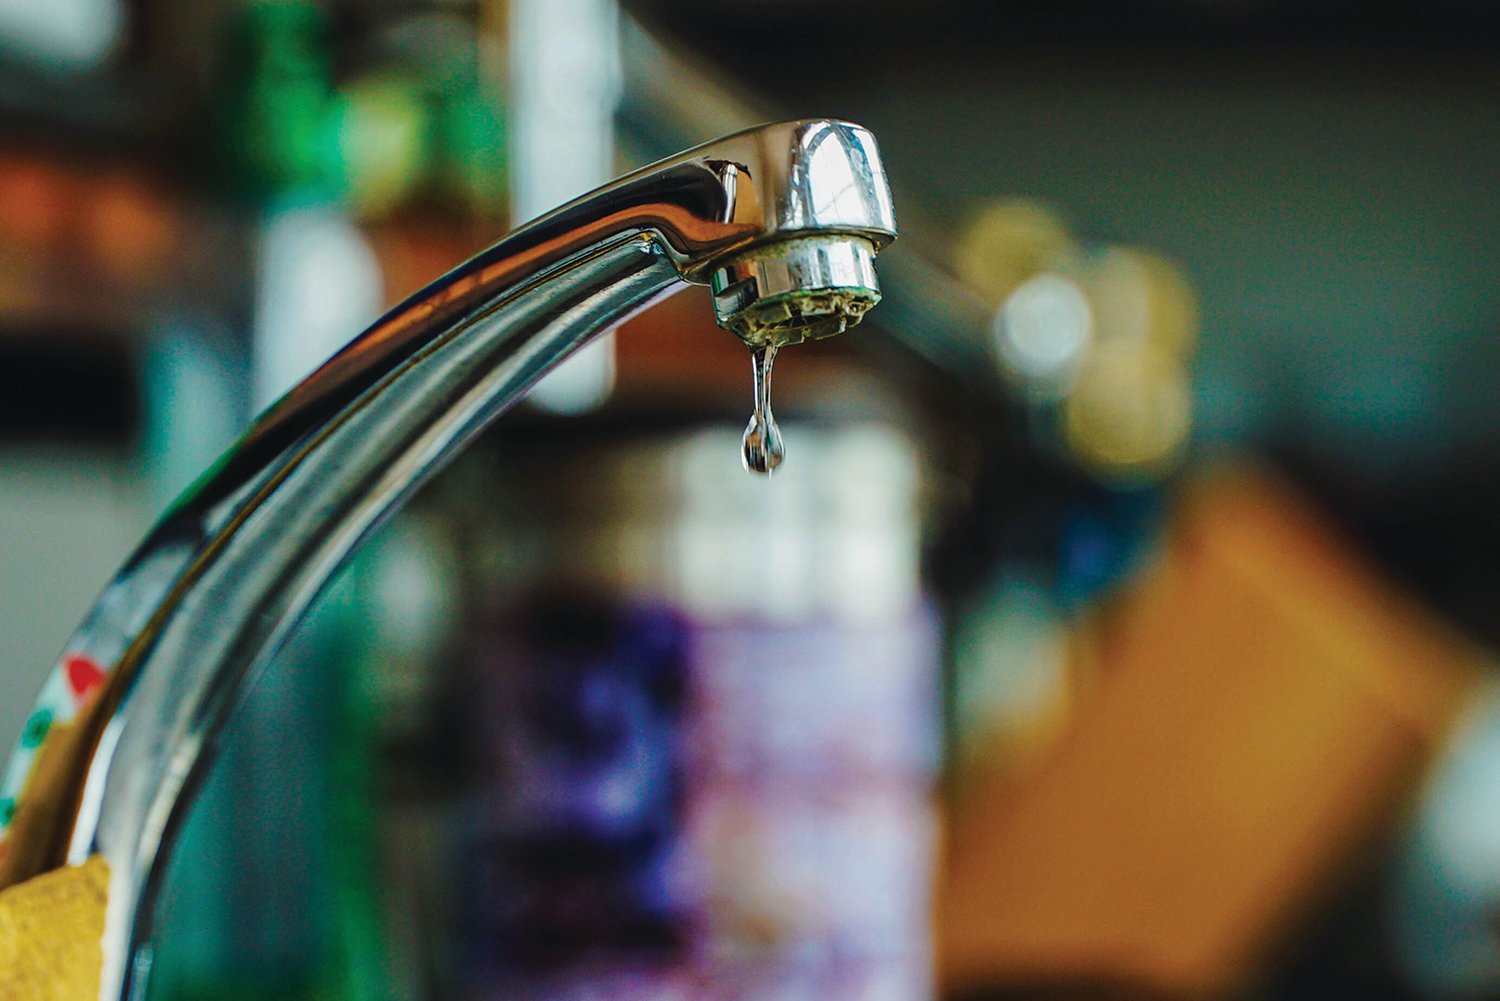 A SMALL STREAM OF WATER running from a kitchen faucet can help prevent pipes freezing during severe winter weather events.